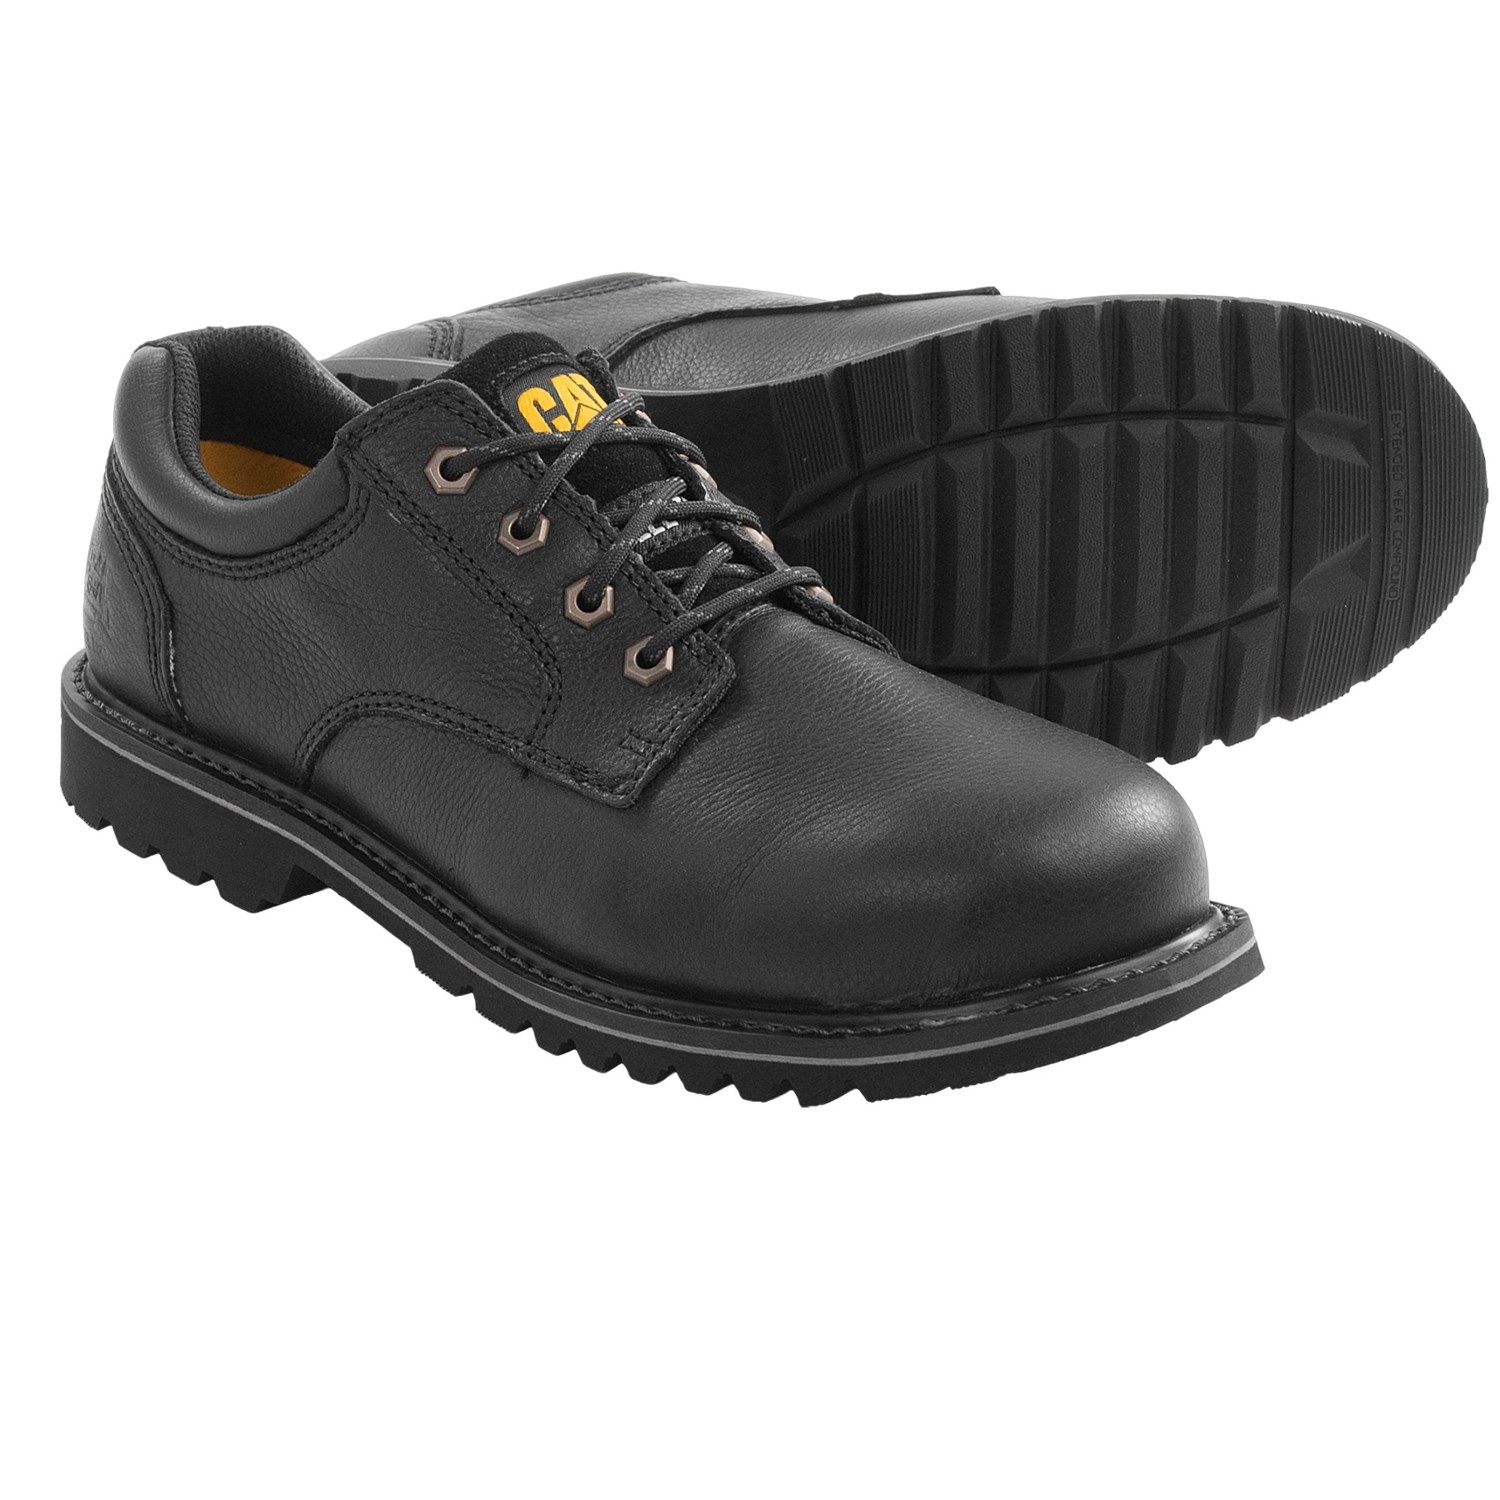 Caterpillar Electric Work Shoes - Steel Toe (For Men) in Black